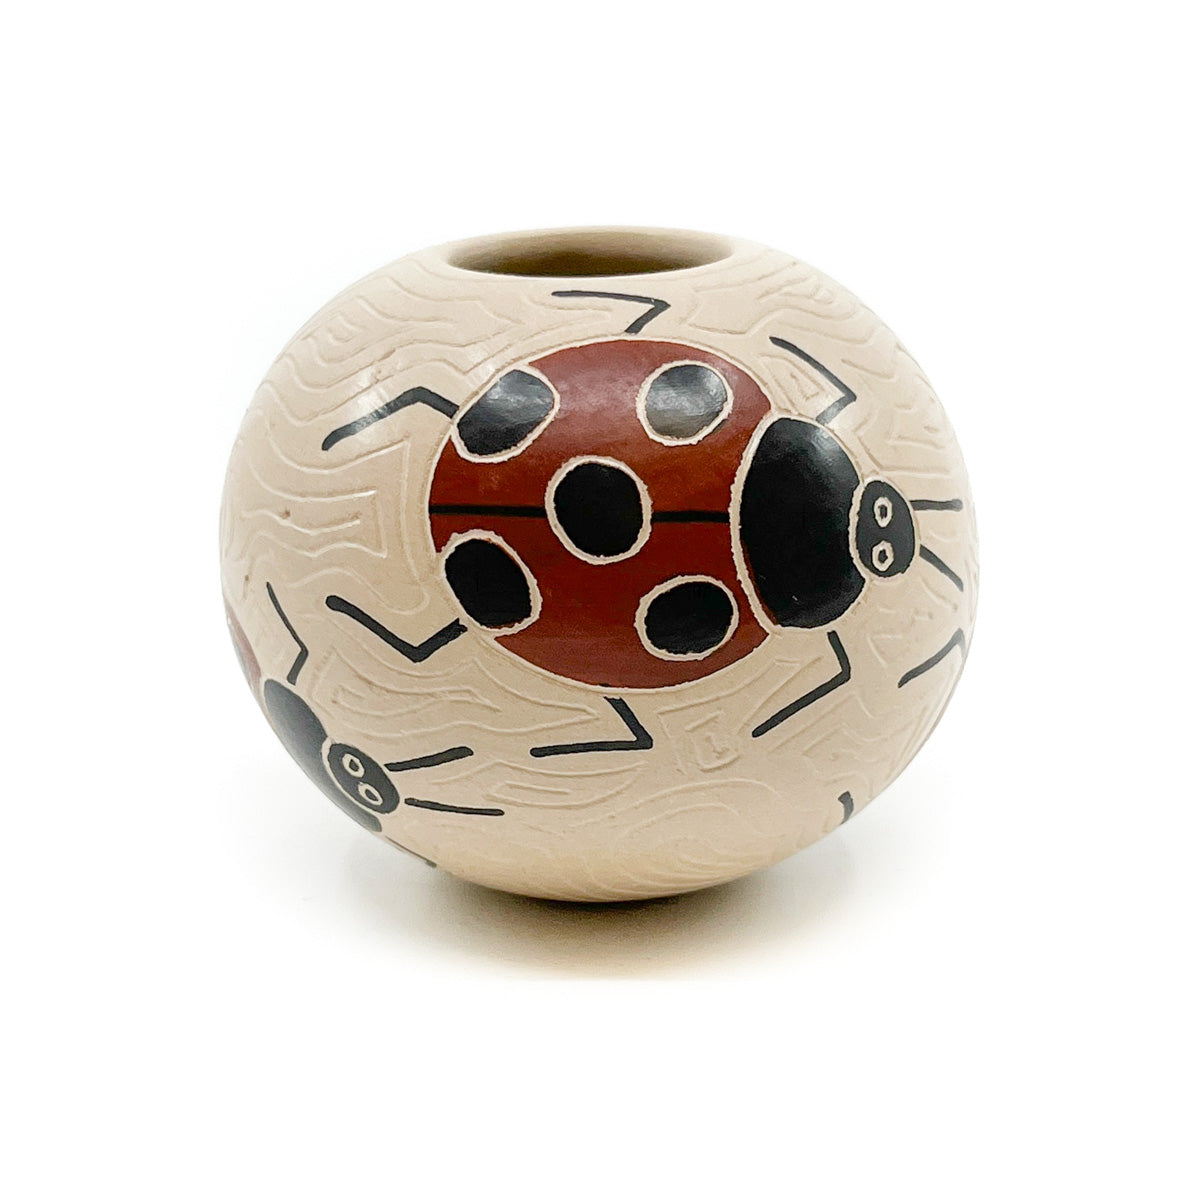 Seed Pot with Lady Bugs on White Clay